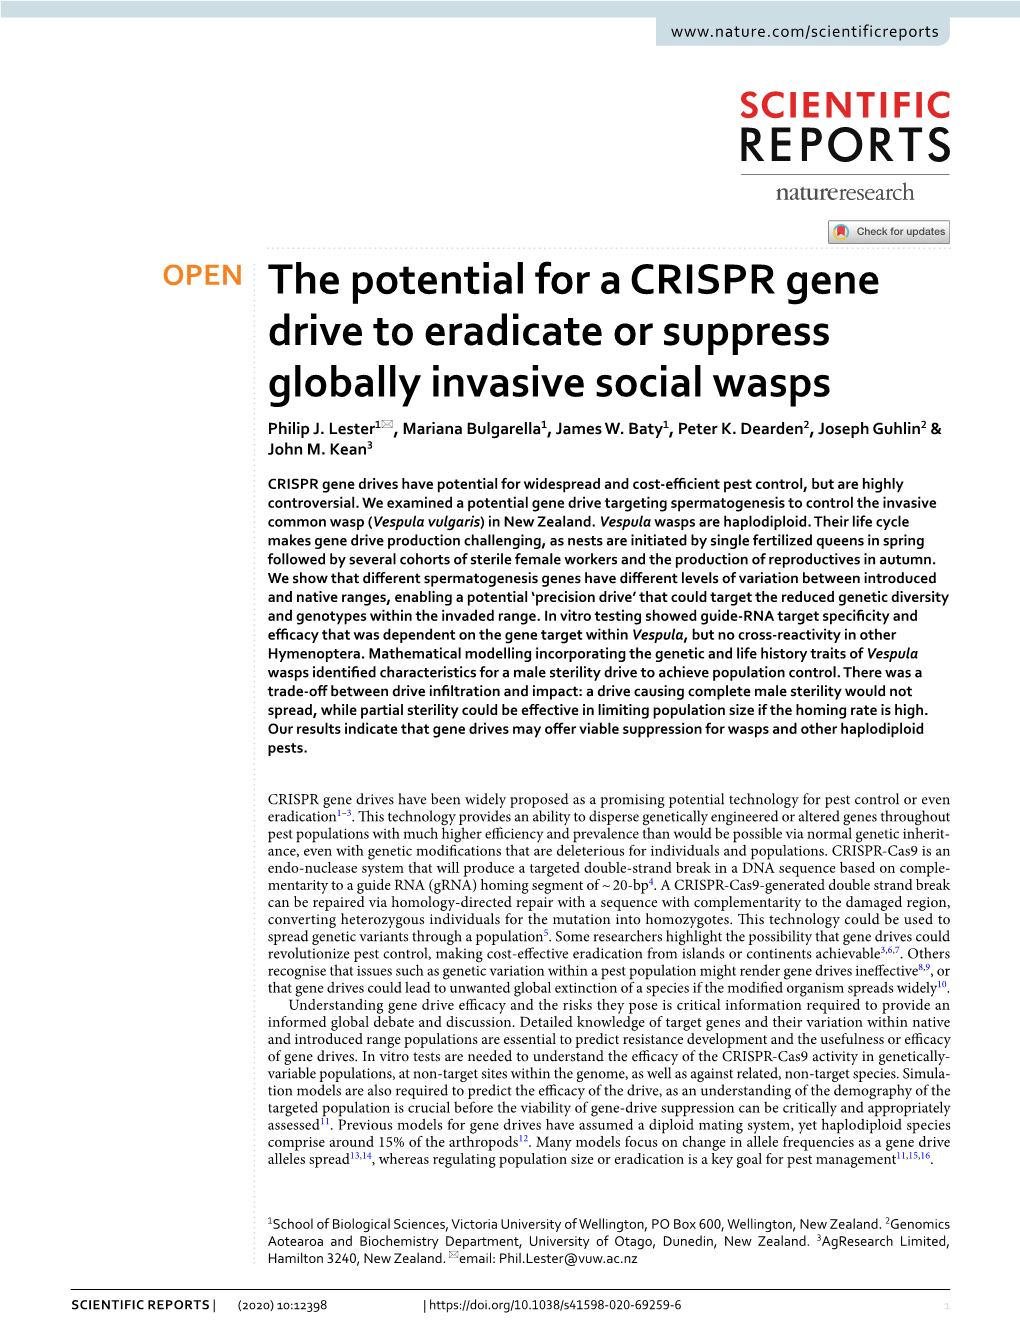 The Potential for a CRISPR Gene Drive to Eradicate Or Suppress Globally Invasive Social Wasps Philip J